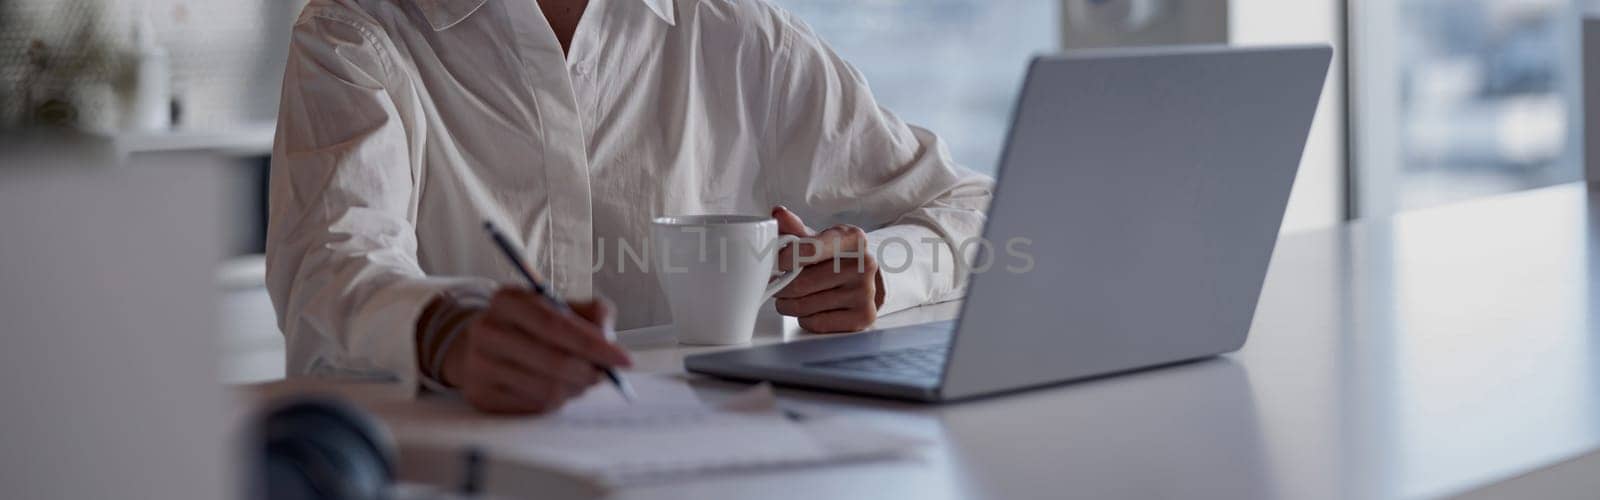 Charming businesswoman working at the office using a laptop looking away. Blurred background